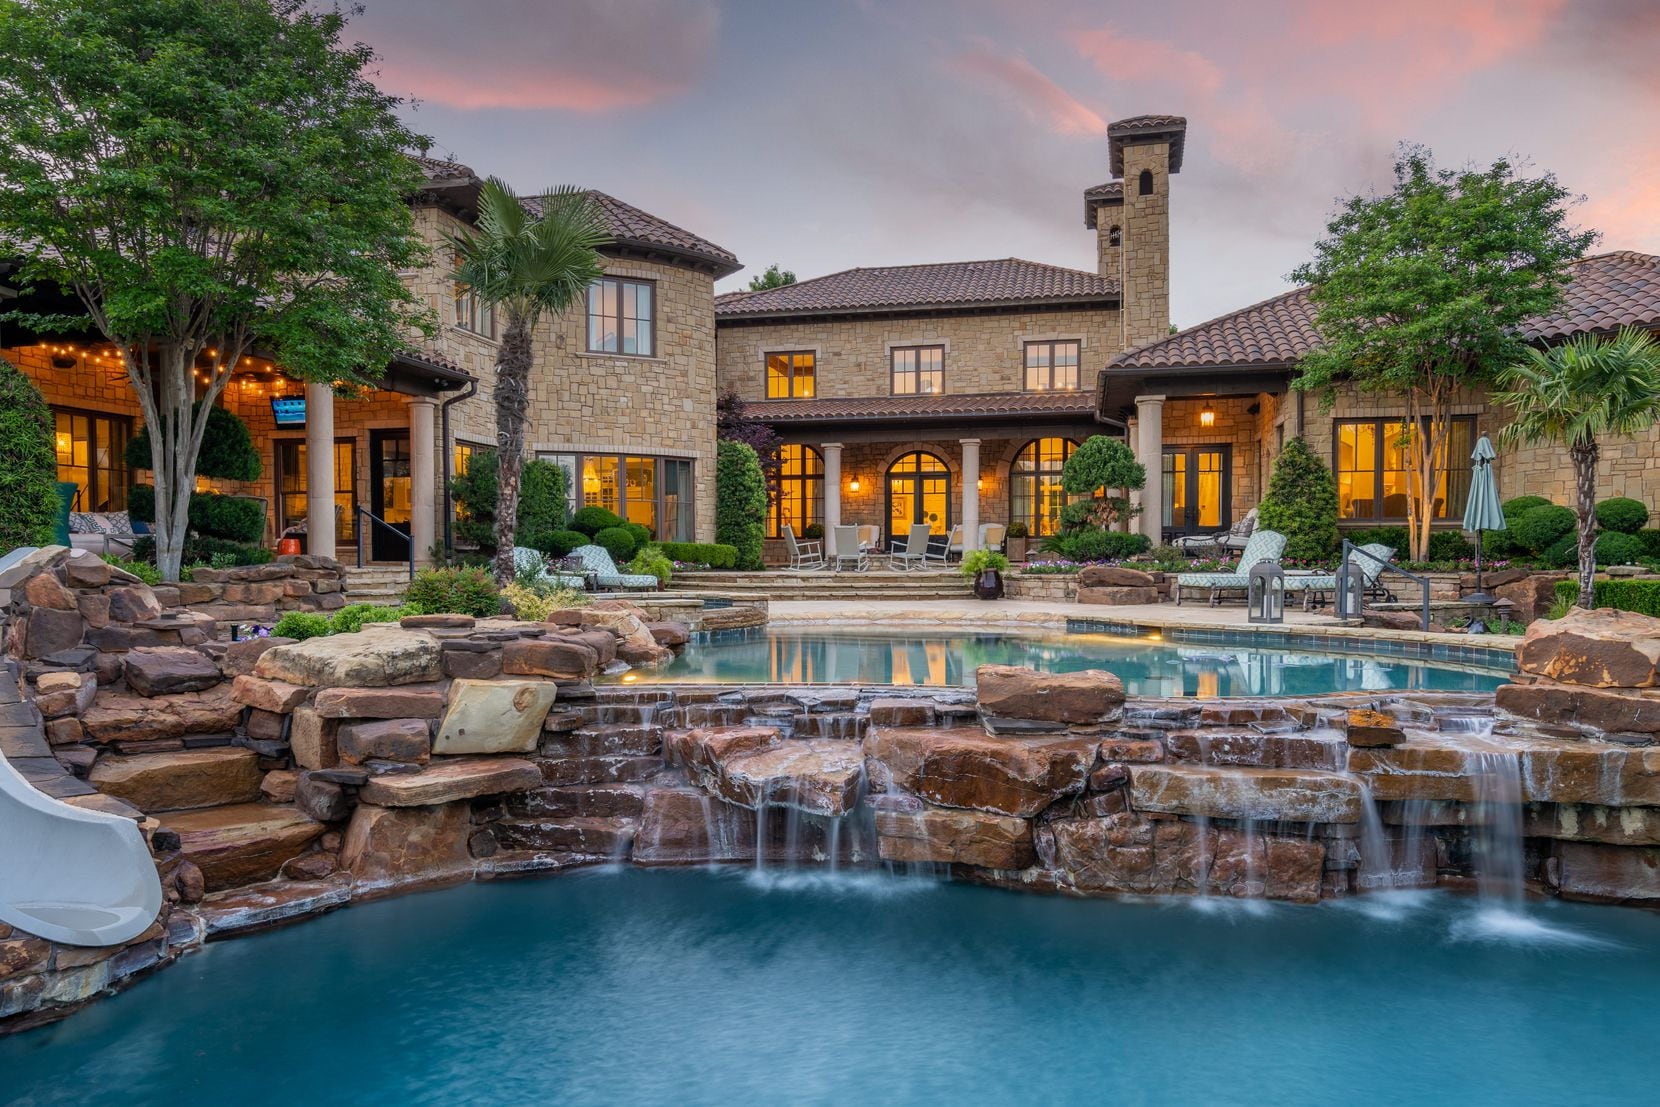 Former Dallas Cowboys star Jason Witten is selling his mansion in Westlake's Vaquero neighborhood for $4.7 million.